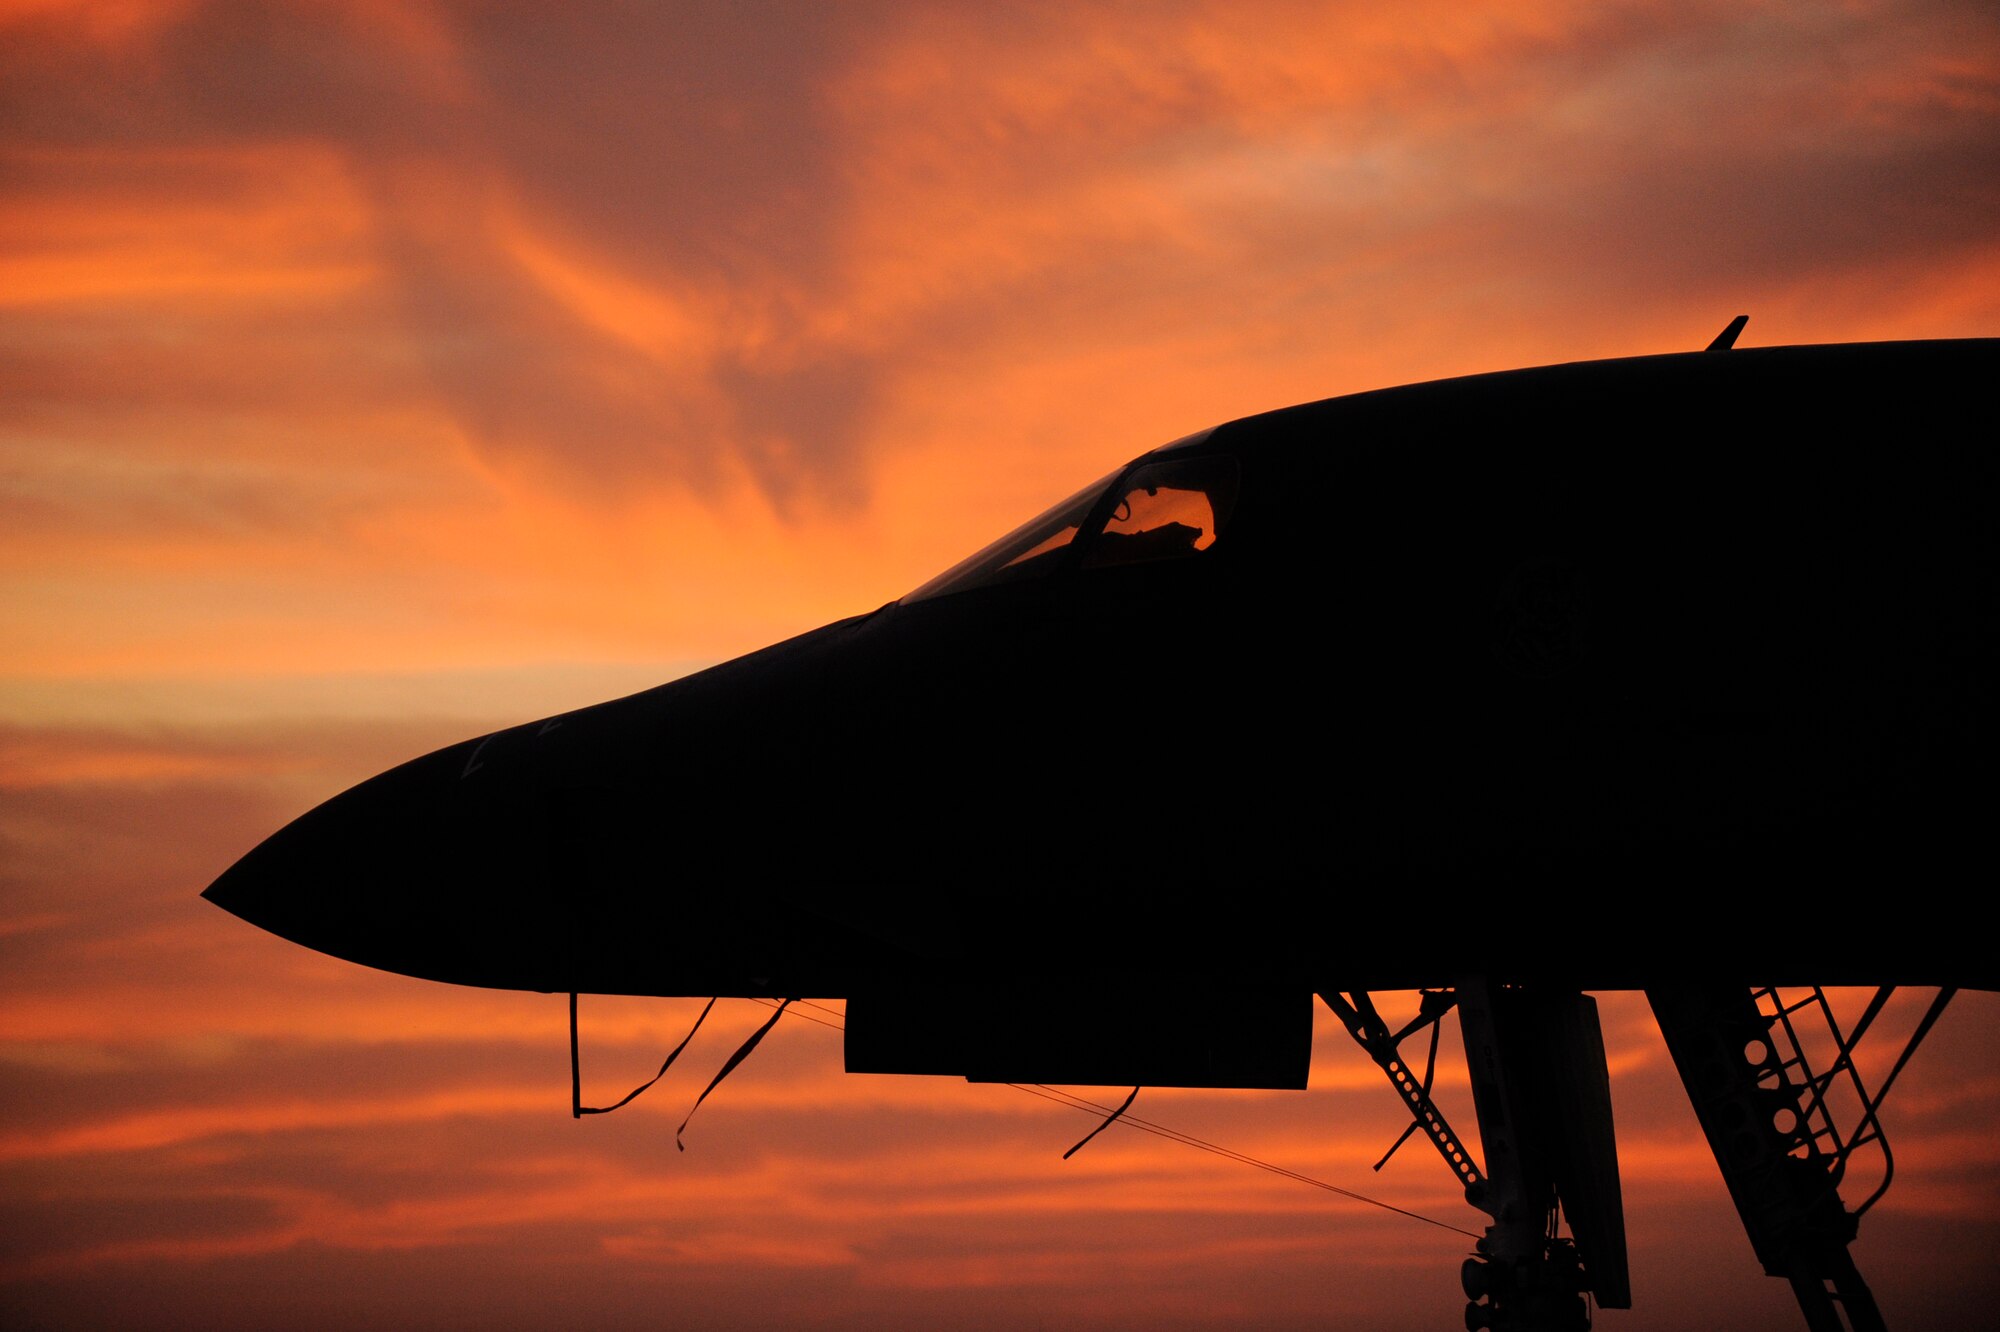 Silhouette of a B-1B Lancer assigned to the 37th Expeditionary Bomb Squadron Jan. 23, 2010, on a flightline in Southwest Asia. The 37th EBS is being replaced by the 34th EBS, both squadrons are from Ellsworth Air Force Base, S.D. (U.S. Air Force photo/Staff Sgt. Manuel J. Martinez\Released)